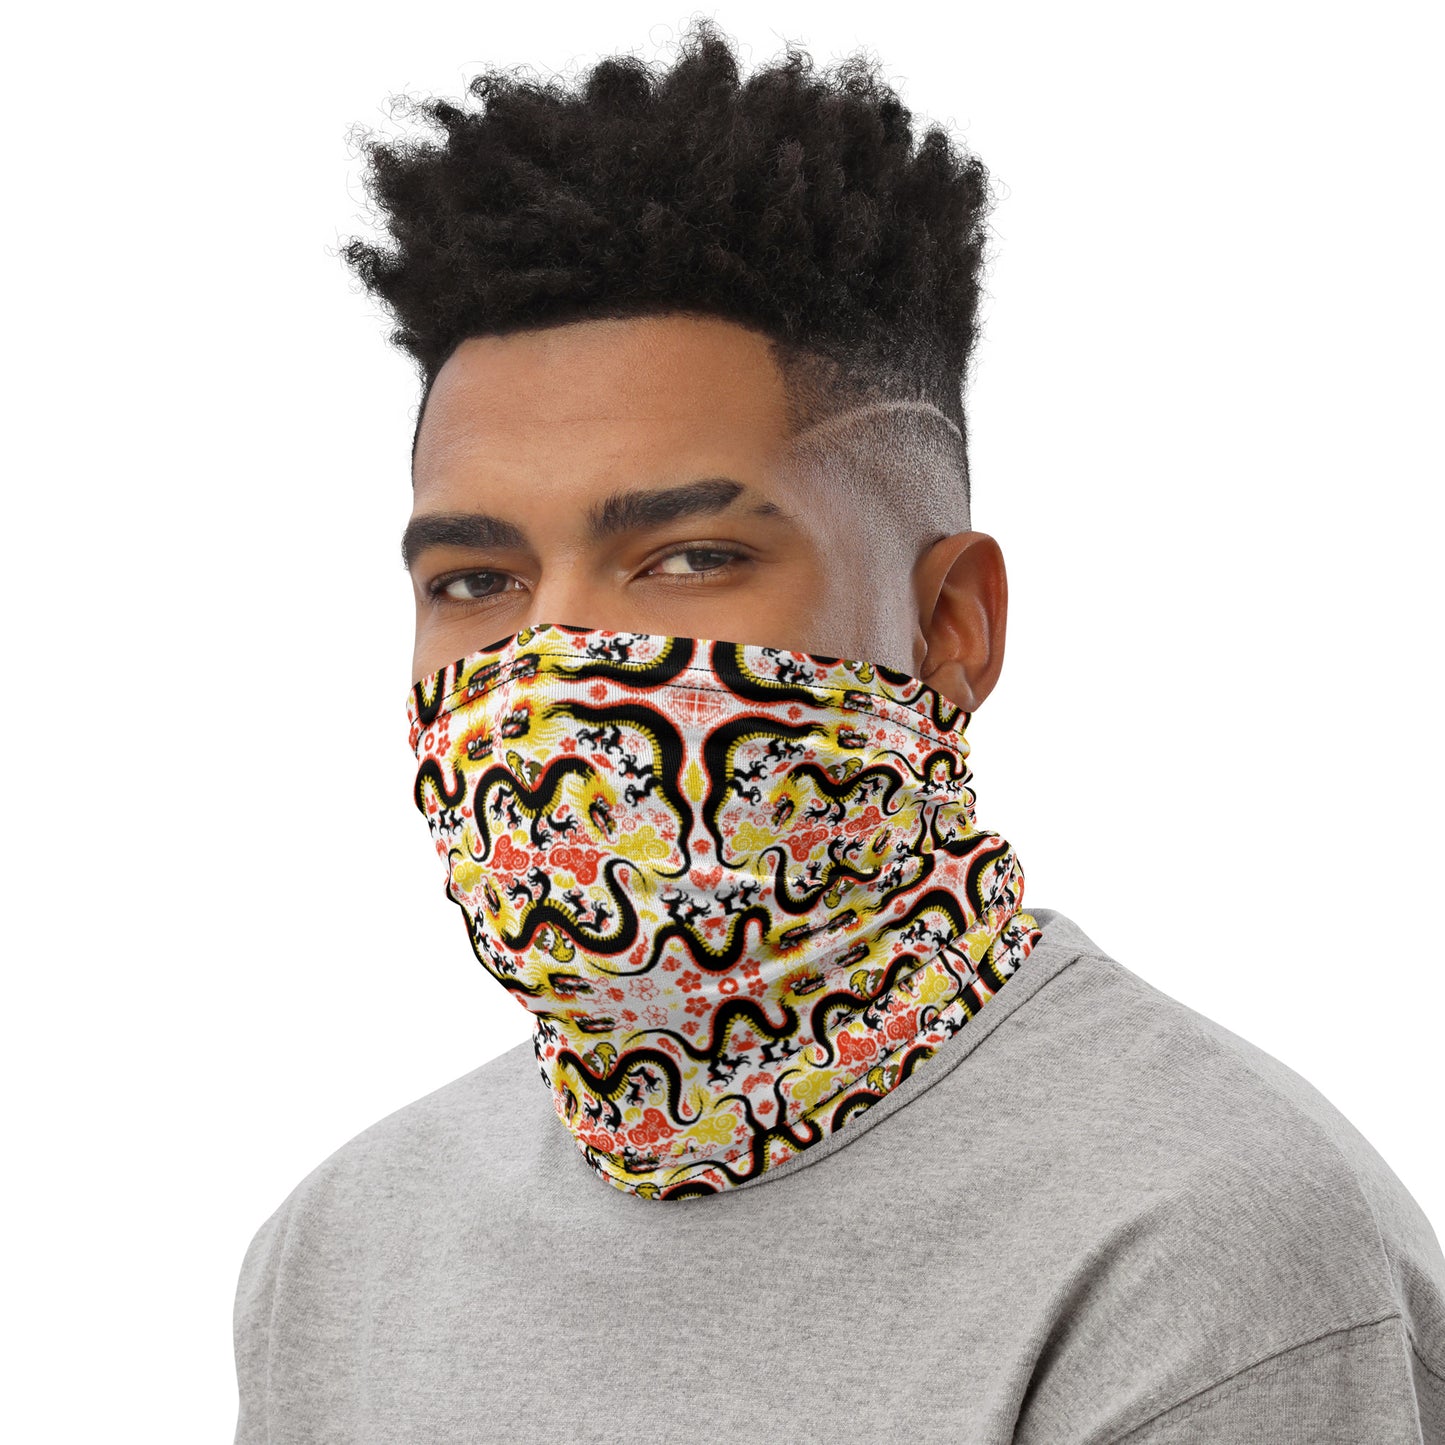 Man wearing Neck Gaiter All-over printed with Legendary Chinese dragons pattern art. Neck warmer